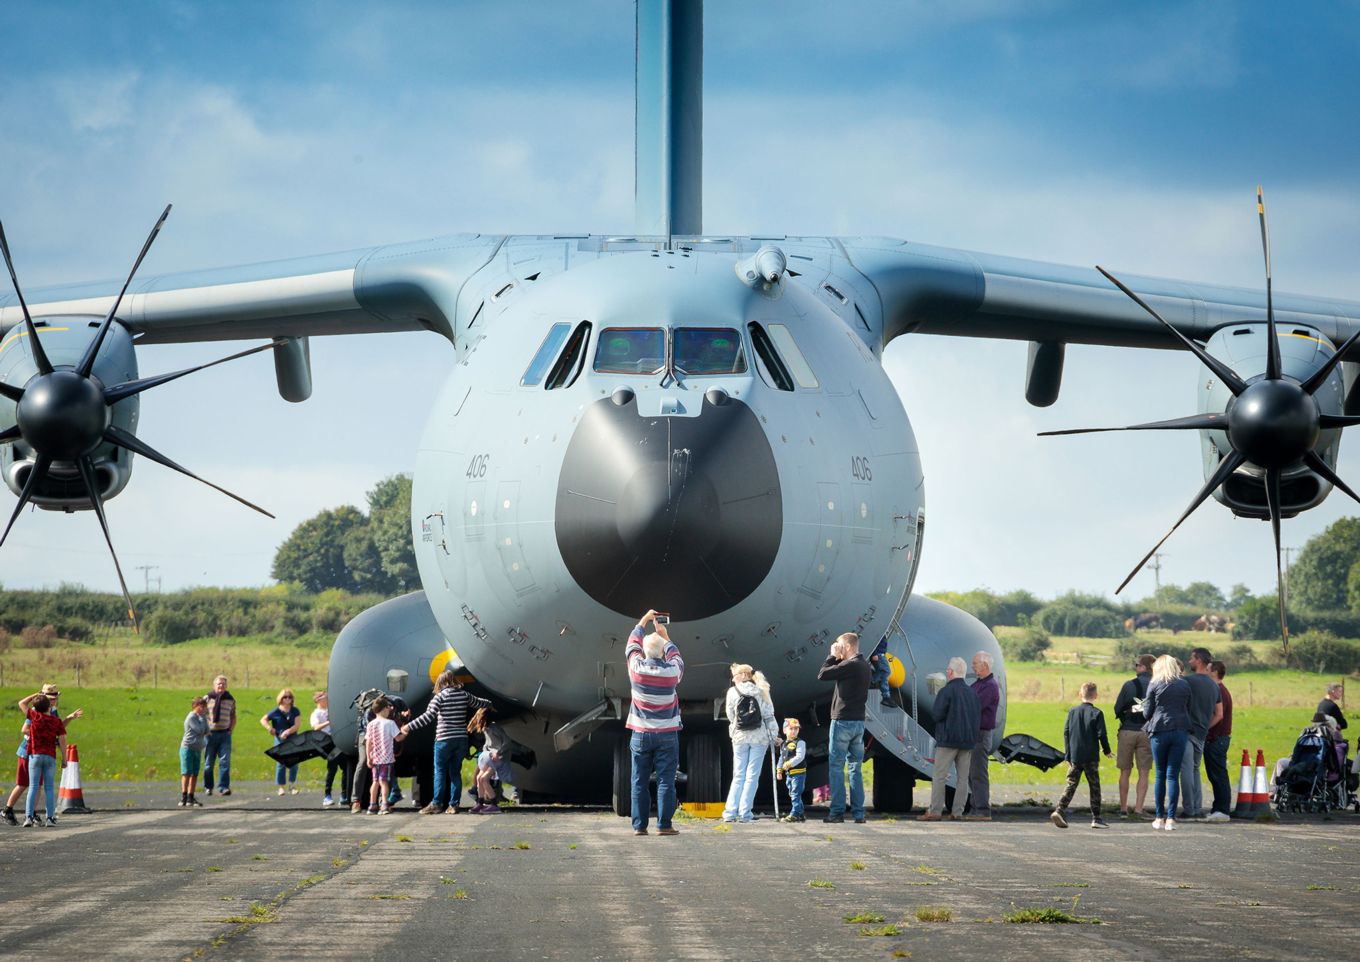 Hundreds of people enjoyed looking around the airfield and the A400M Atlas.